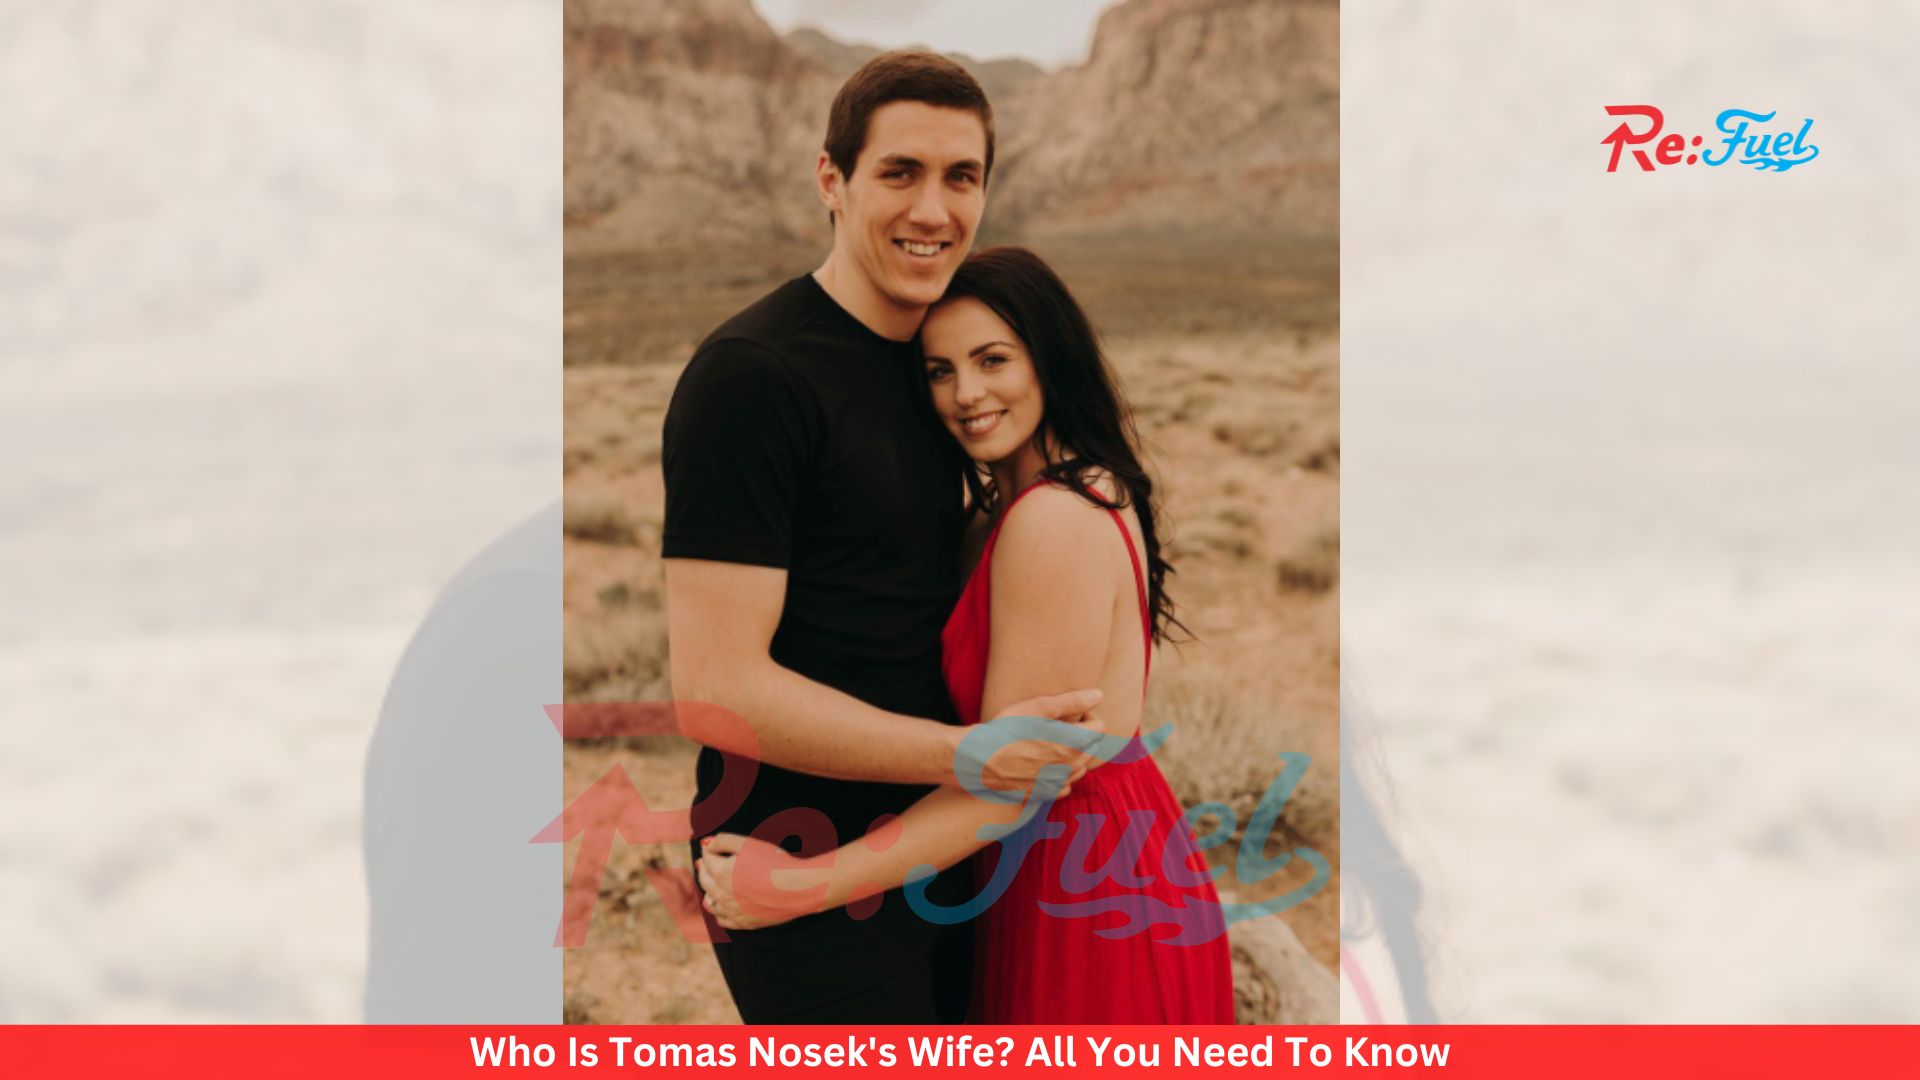 Who Is Tomas Nosek's Wife? All You Need To Know